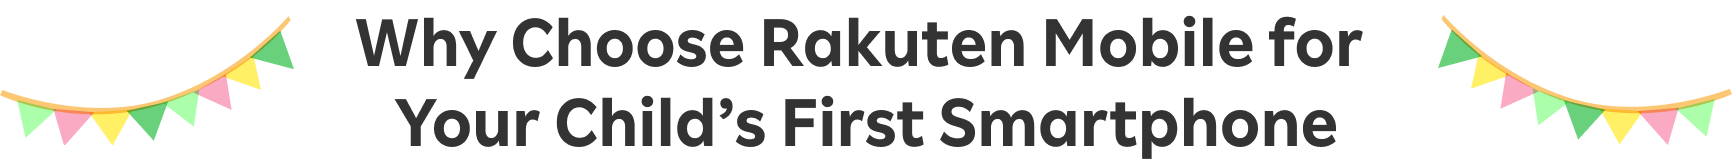 Why Choose Rakuten Mobile for Your Child’s First Smartphone